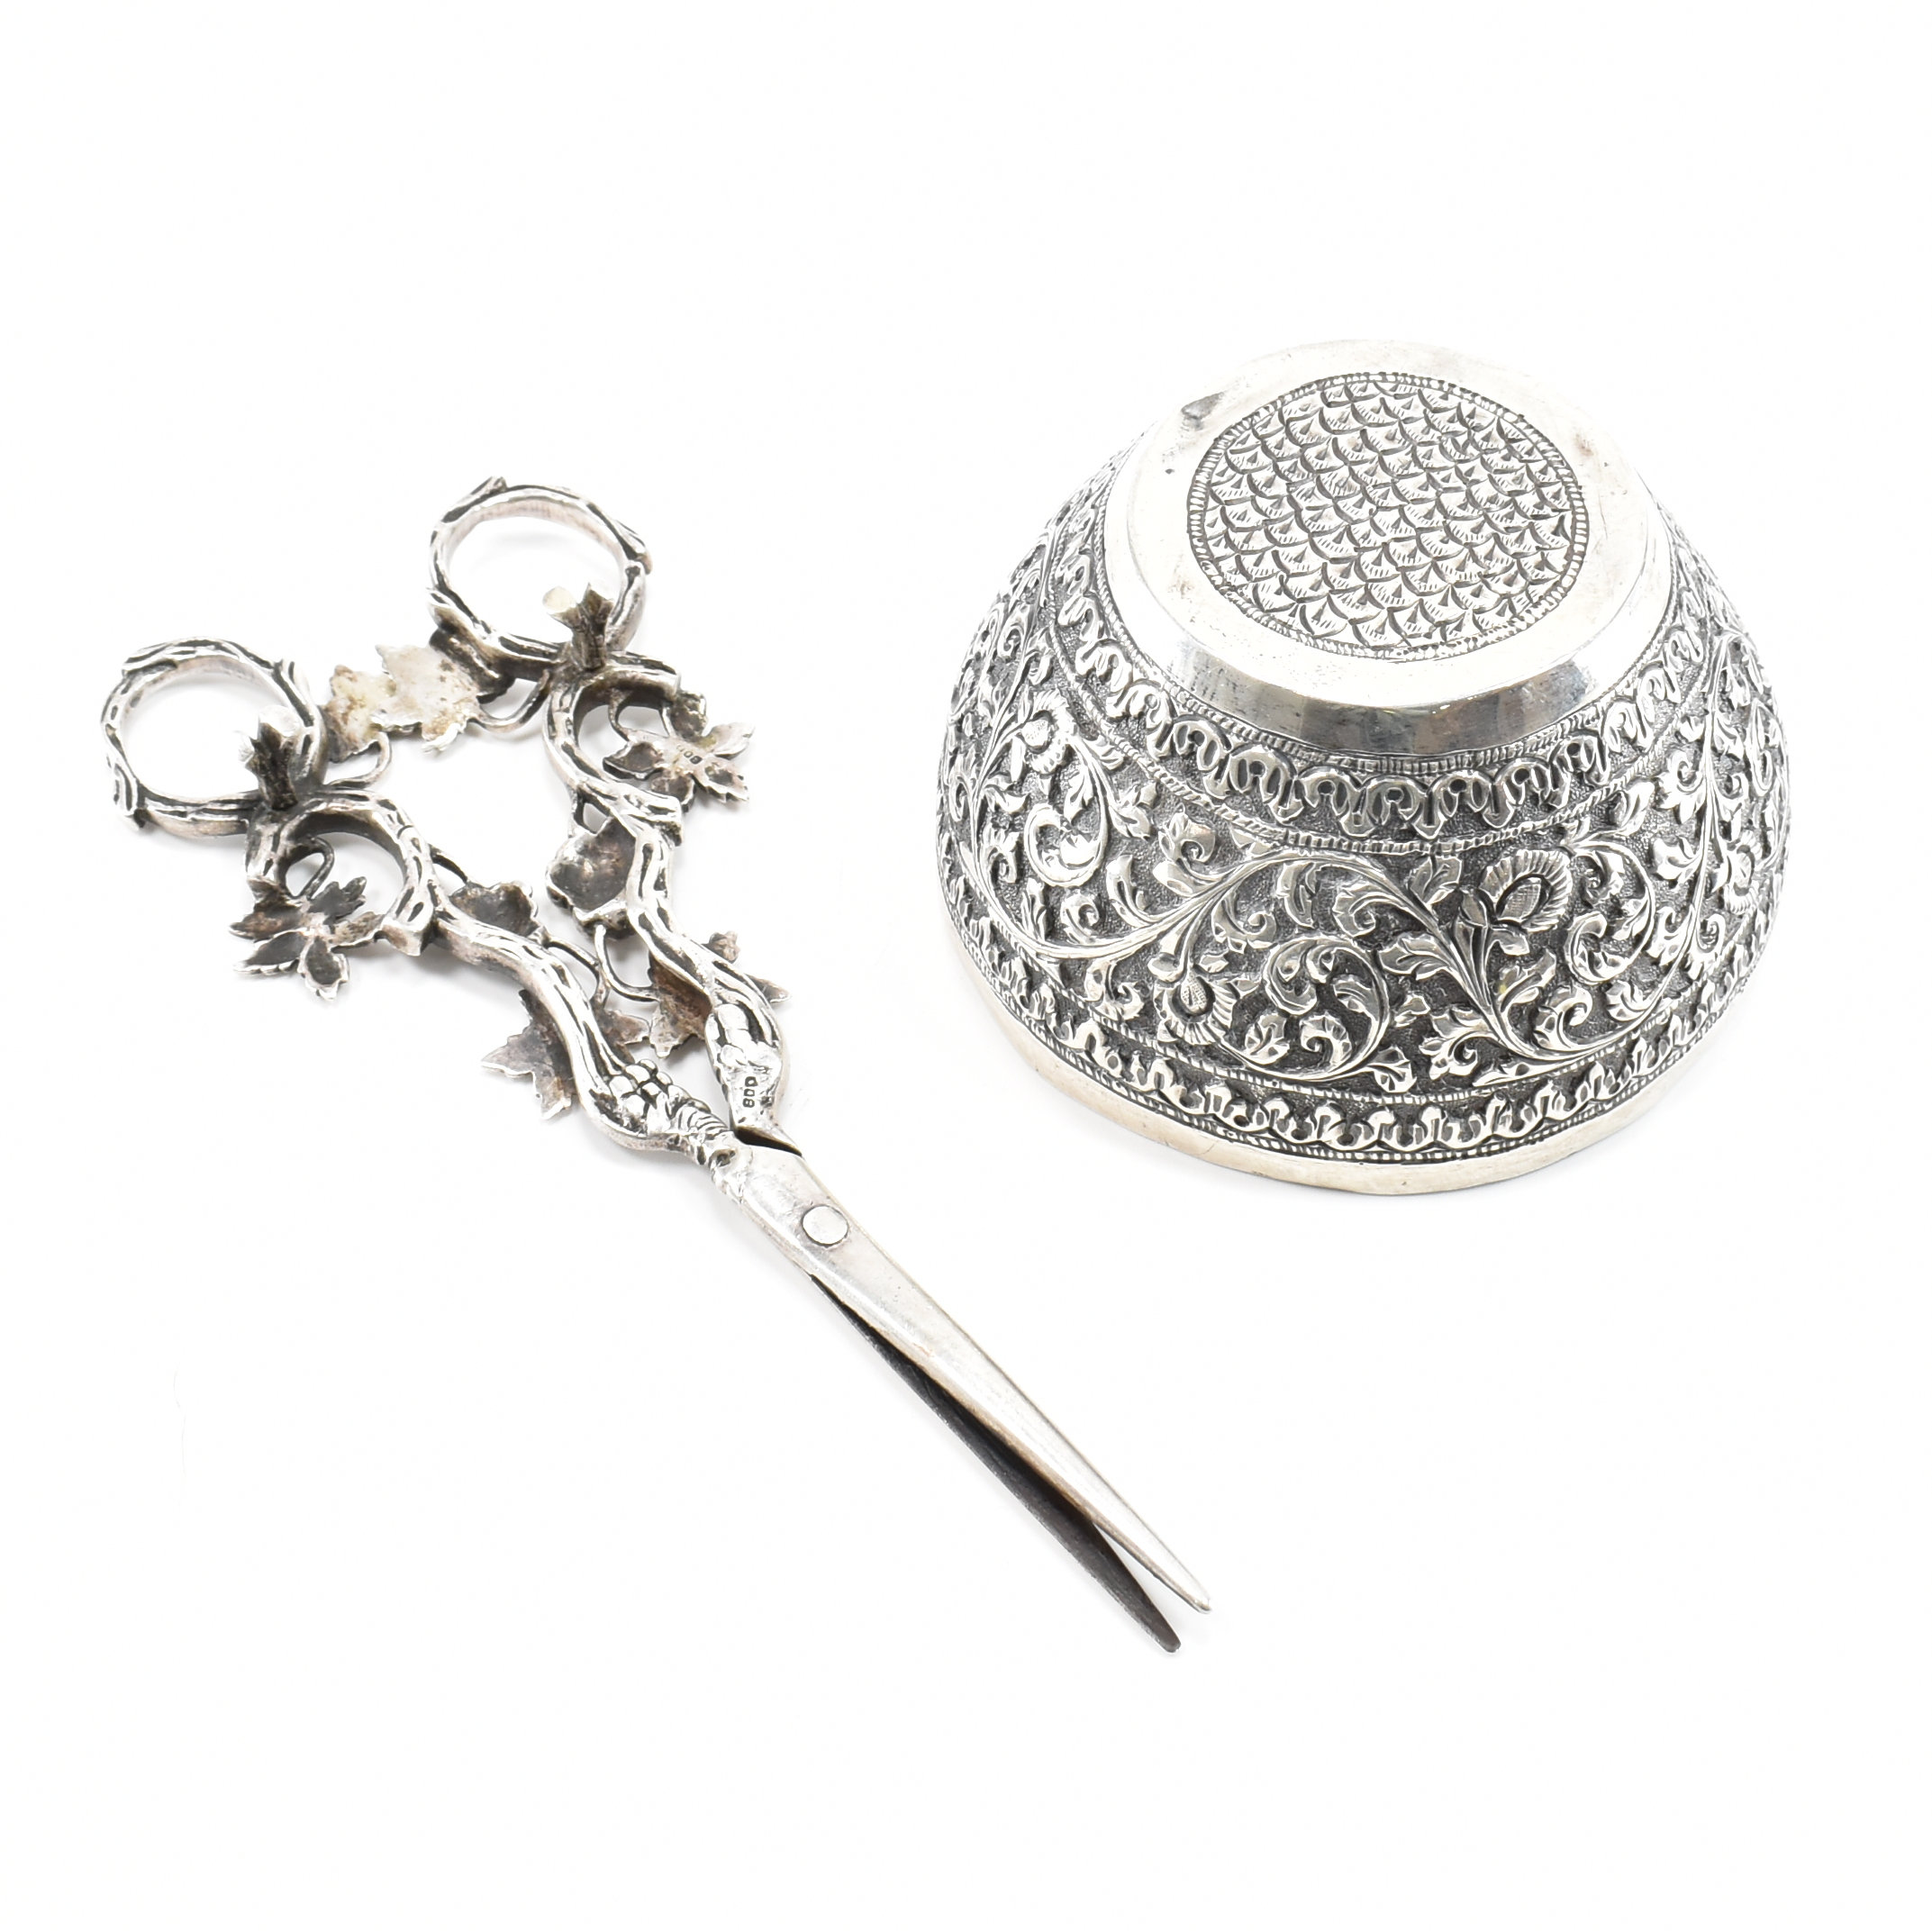 A PAIR OF 800 MARKED SILVER GRAPE SCISSORS TOGETHER WITH A SILVER BOWL - Image 2 of 4